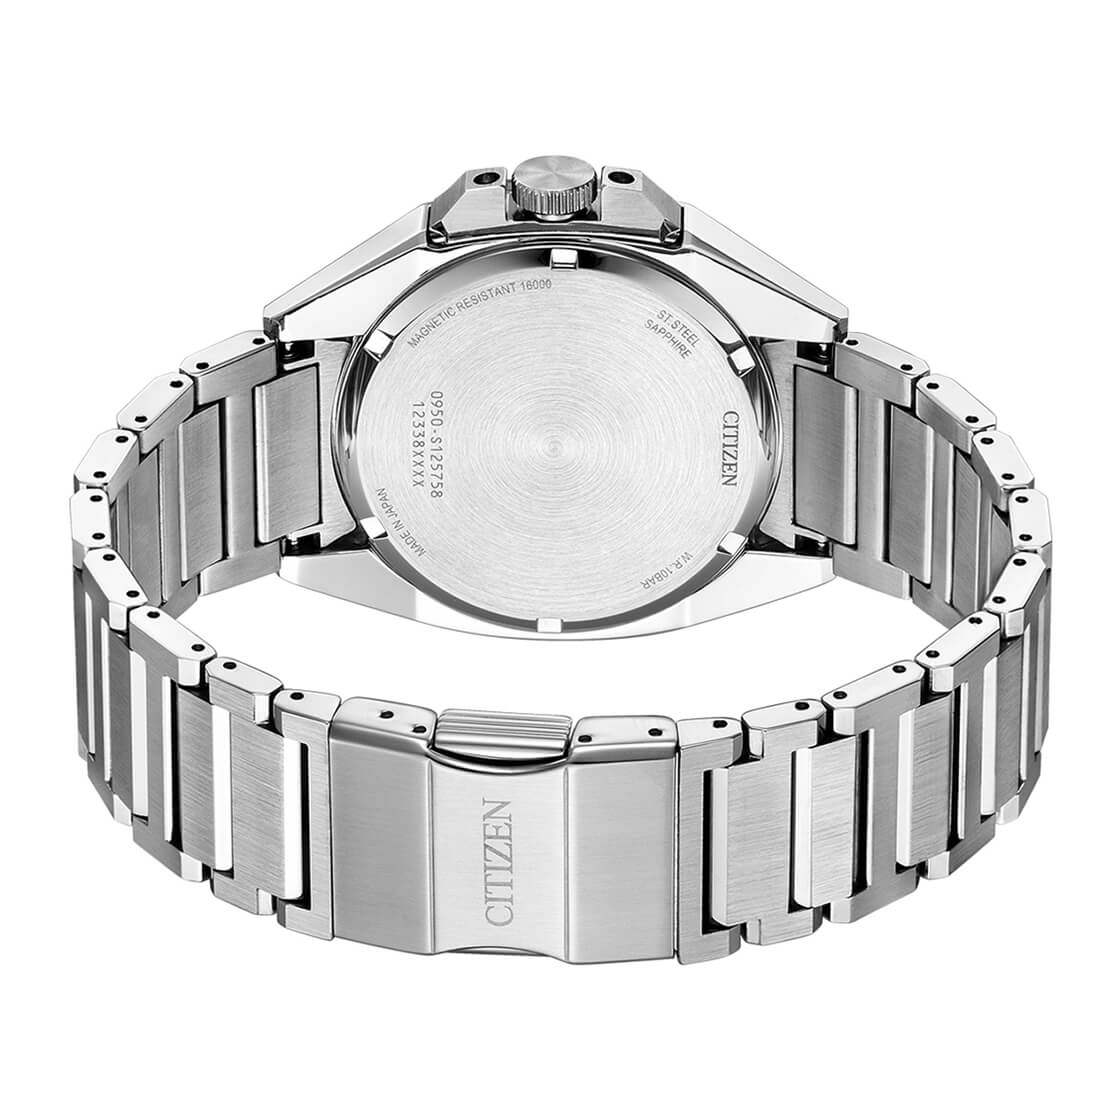 Men's Series 8 Automatic Watch (NA1010-84X)